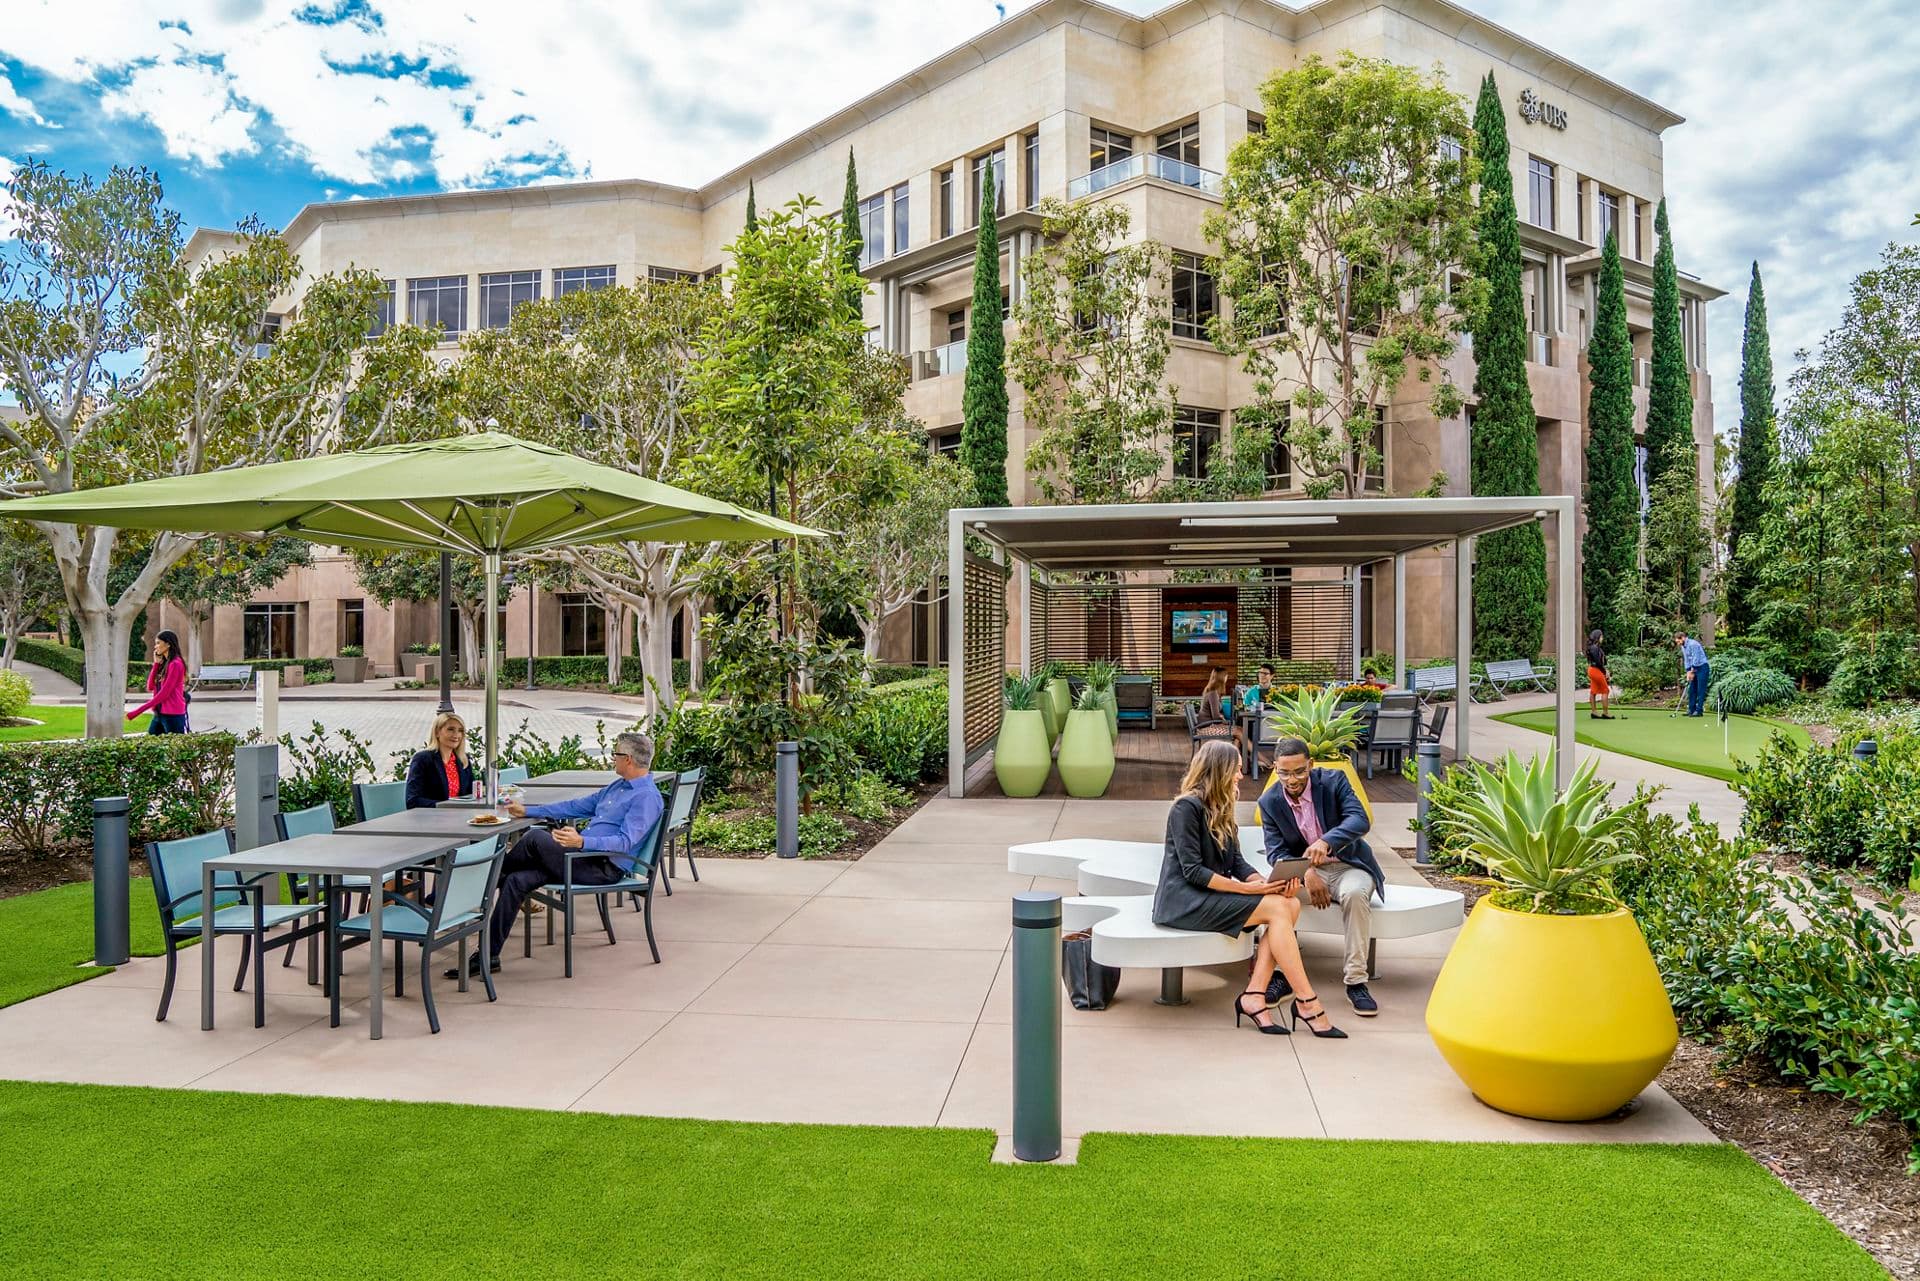 Exterior view of people at The Commons at 888 San Clemente Office Properties in Newport Beach, CA.